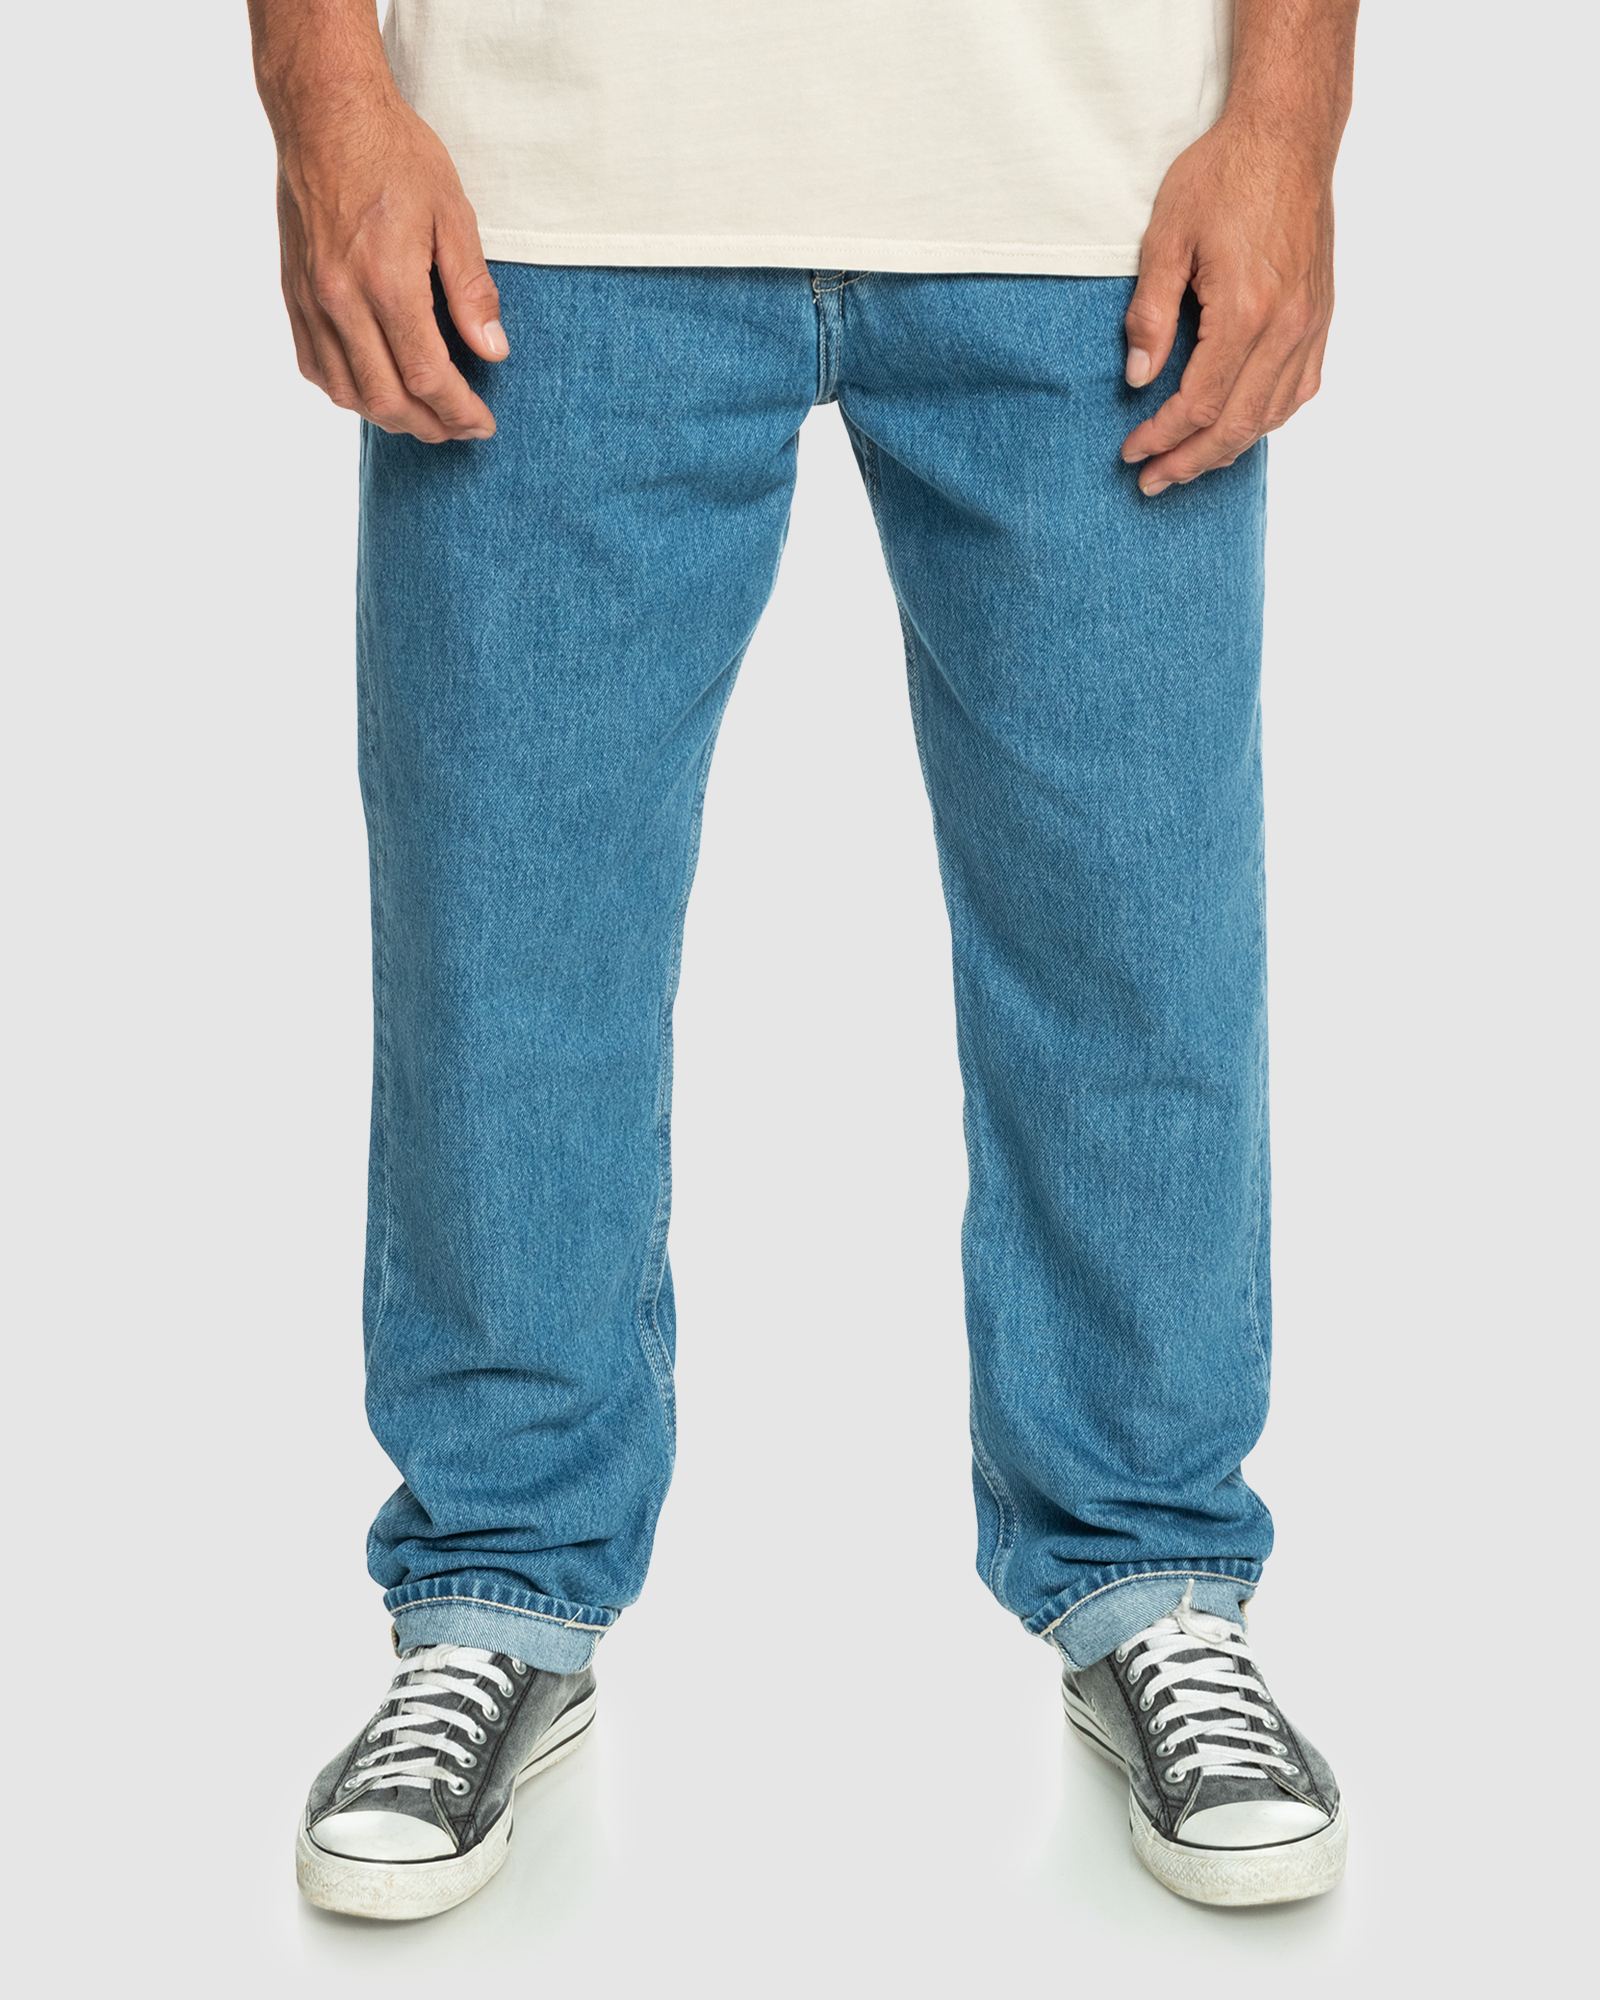 Quiksilver Mens Tapered Nineties Wash Jeans - Ice | SurfStitch